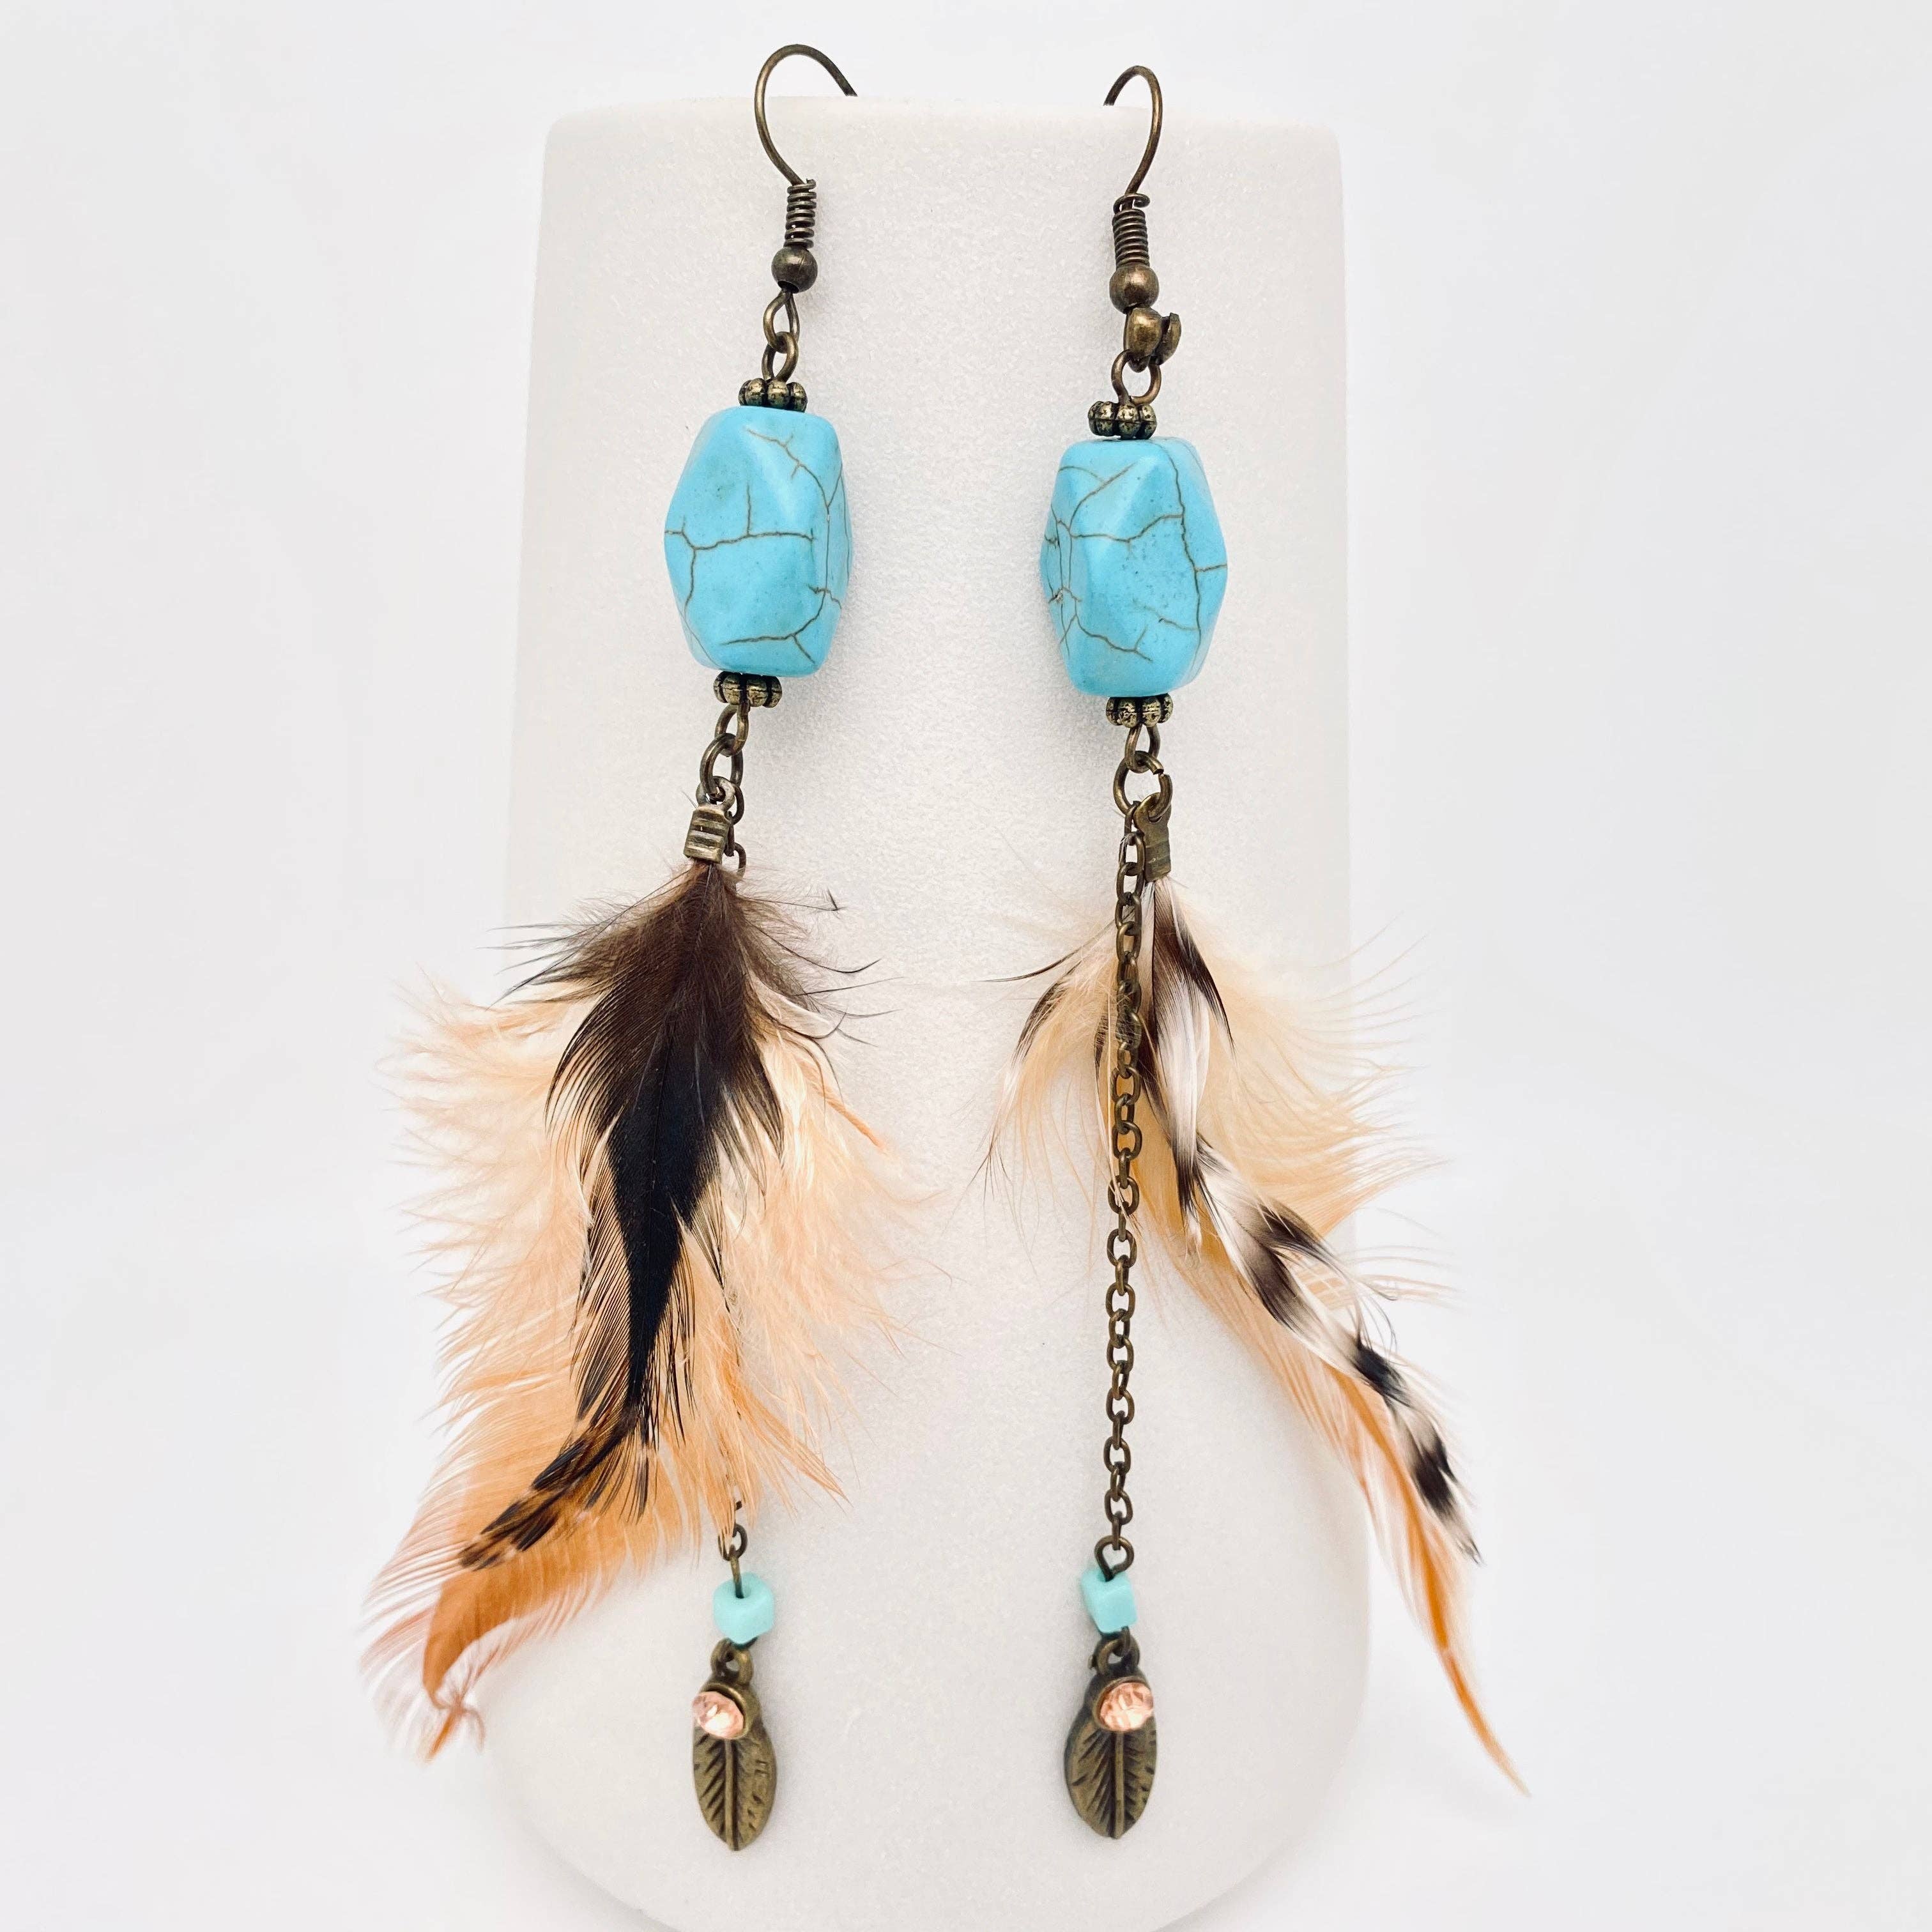 Share more than 179 metal feather earrings latest